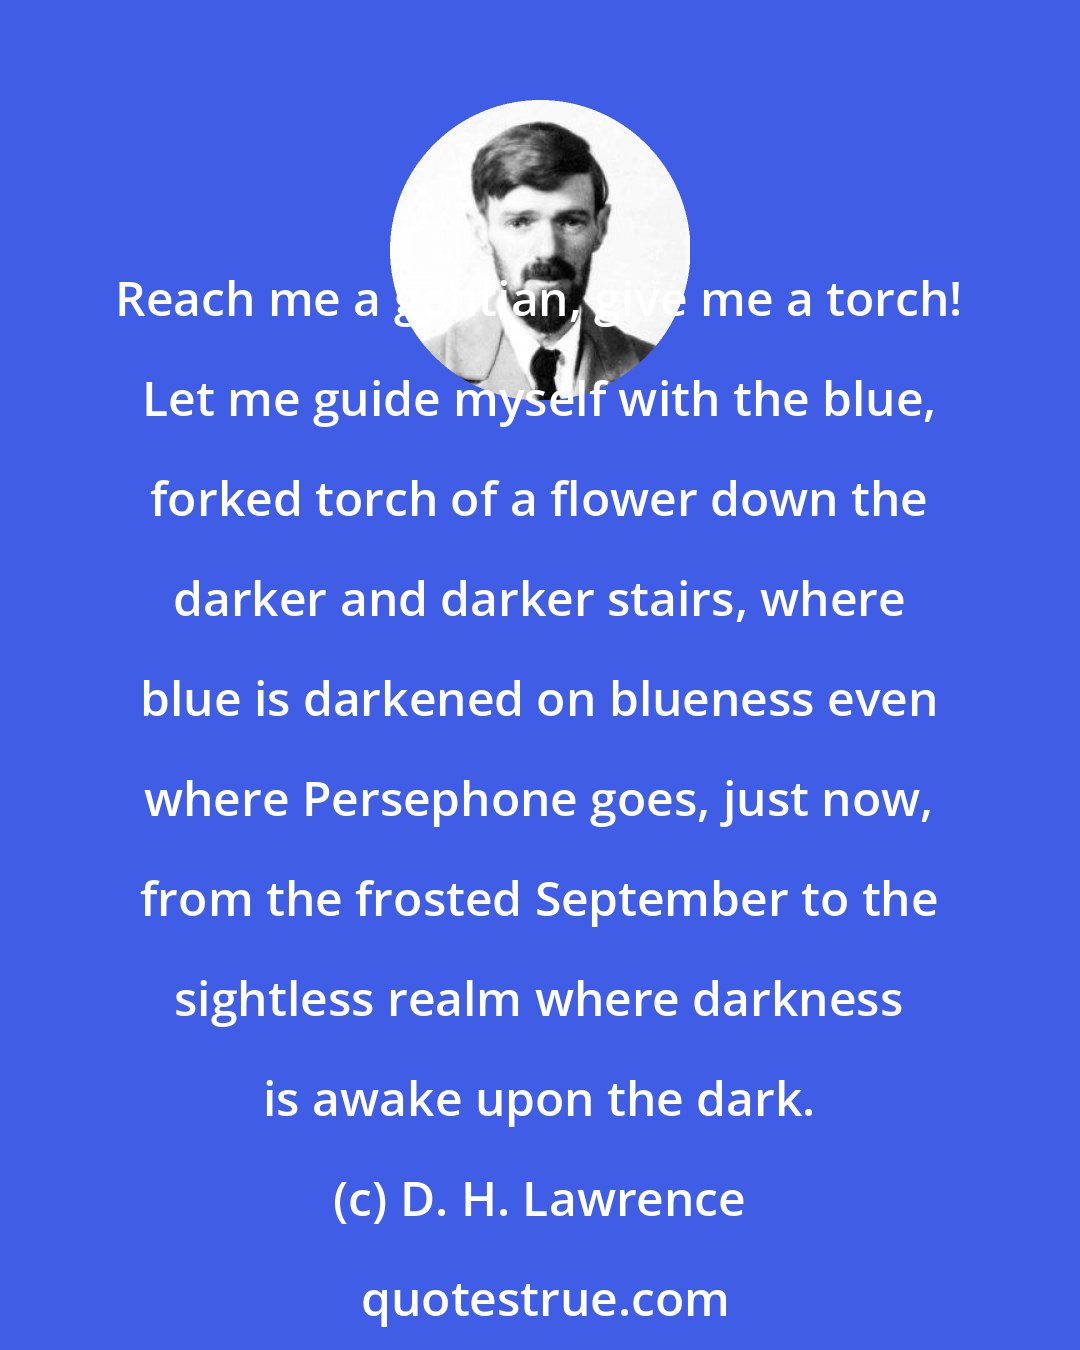 D. H. Lawrence: Reach me a gentian, give me a torch! Let me guide myself with the blue, forked torch of a flower down the darker and darker stairs, where blue is darkened on blueness even where Persephone goes, just now, from the frosted September to the sightless realm where darkness is awake upon the dark.